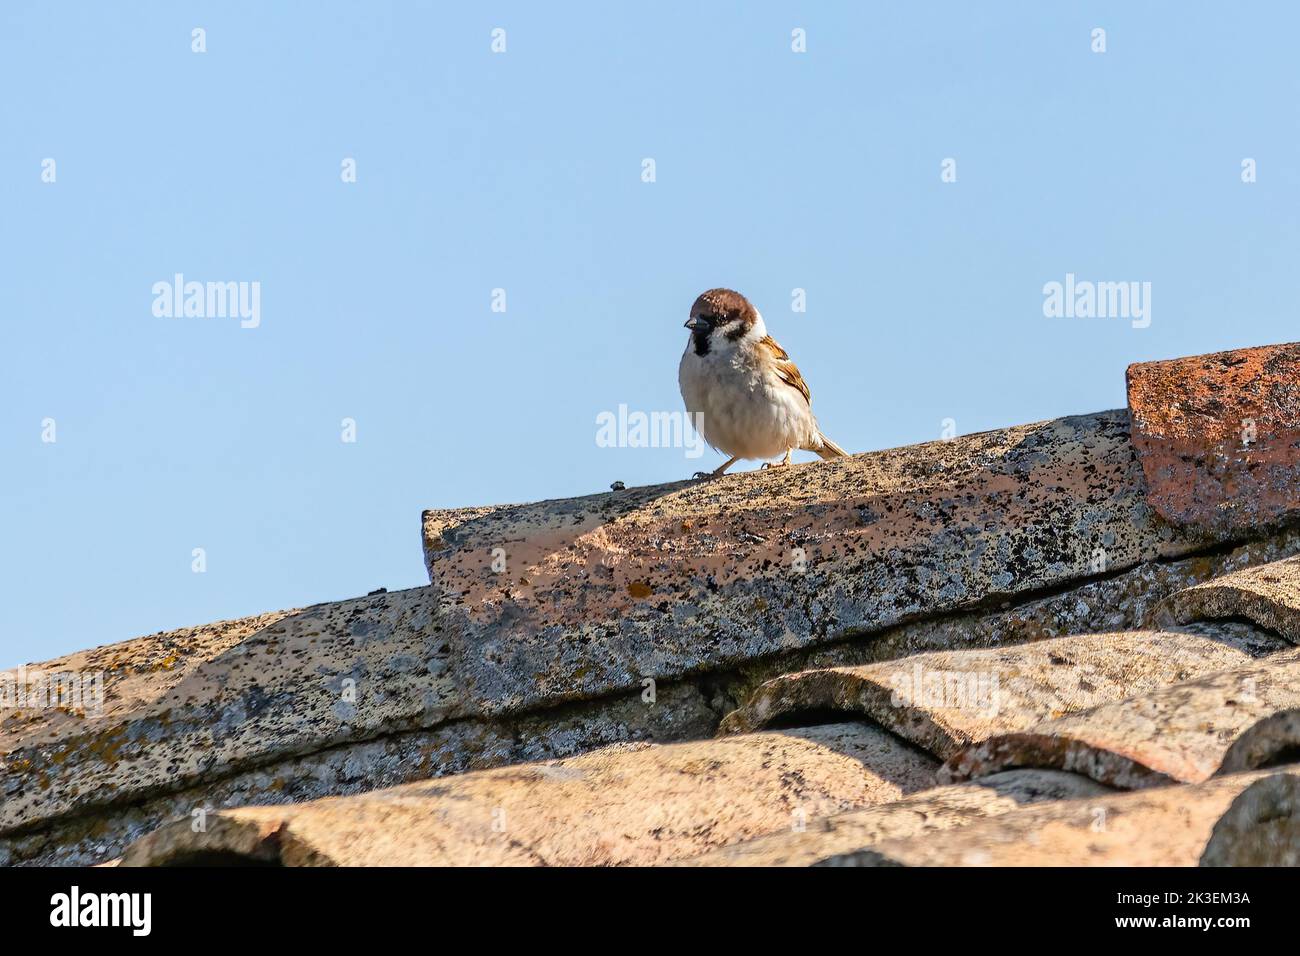 Male Eurasian tree sparrow (Passer montanus) in the roof of a rustic house, is a passerine bird in the sparrow family with a rich chestnut crown and n Stock Photo